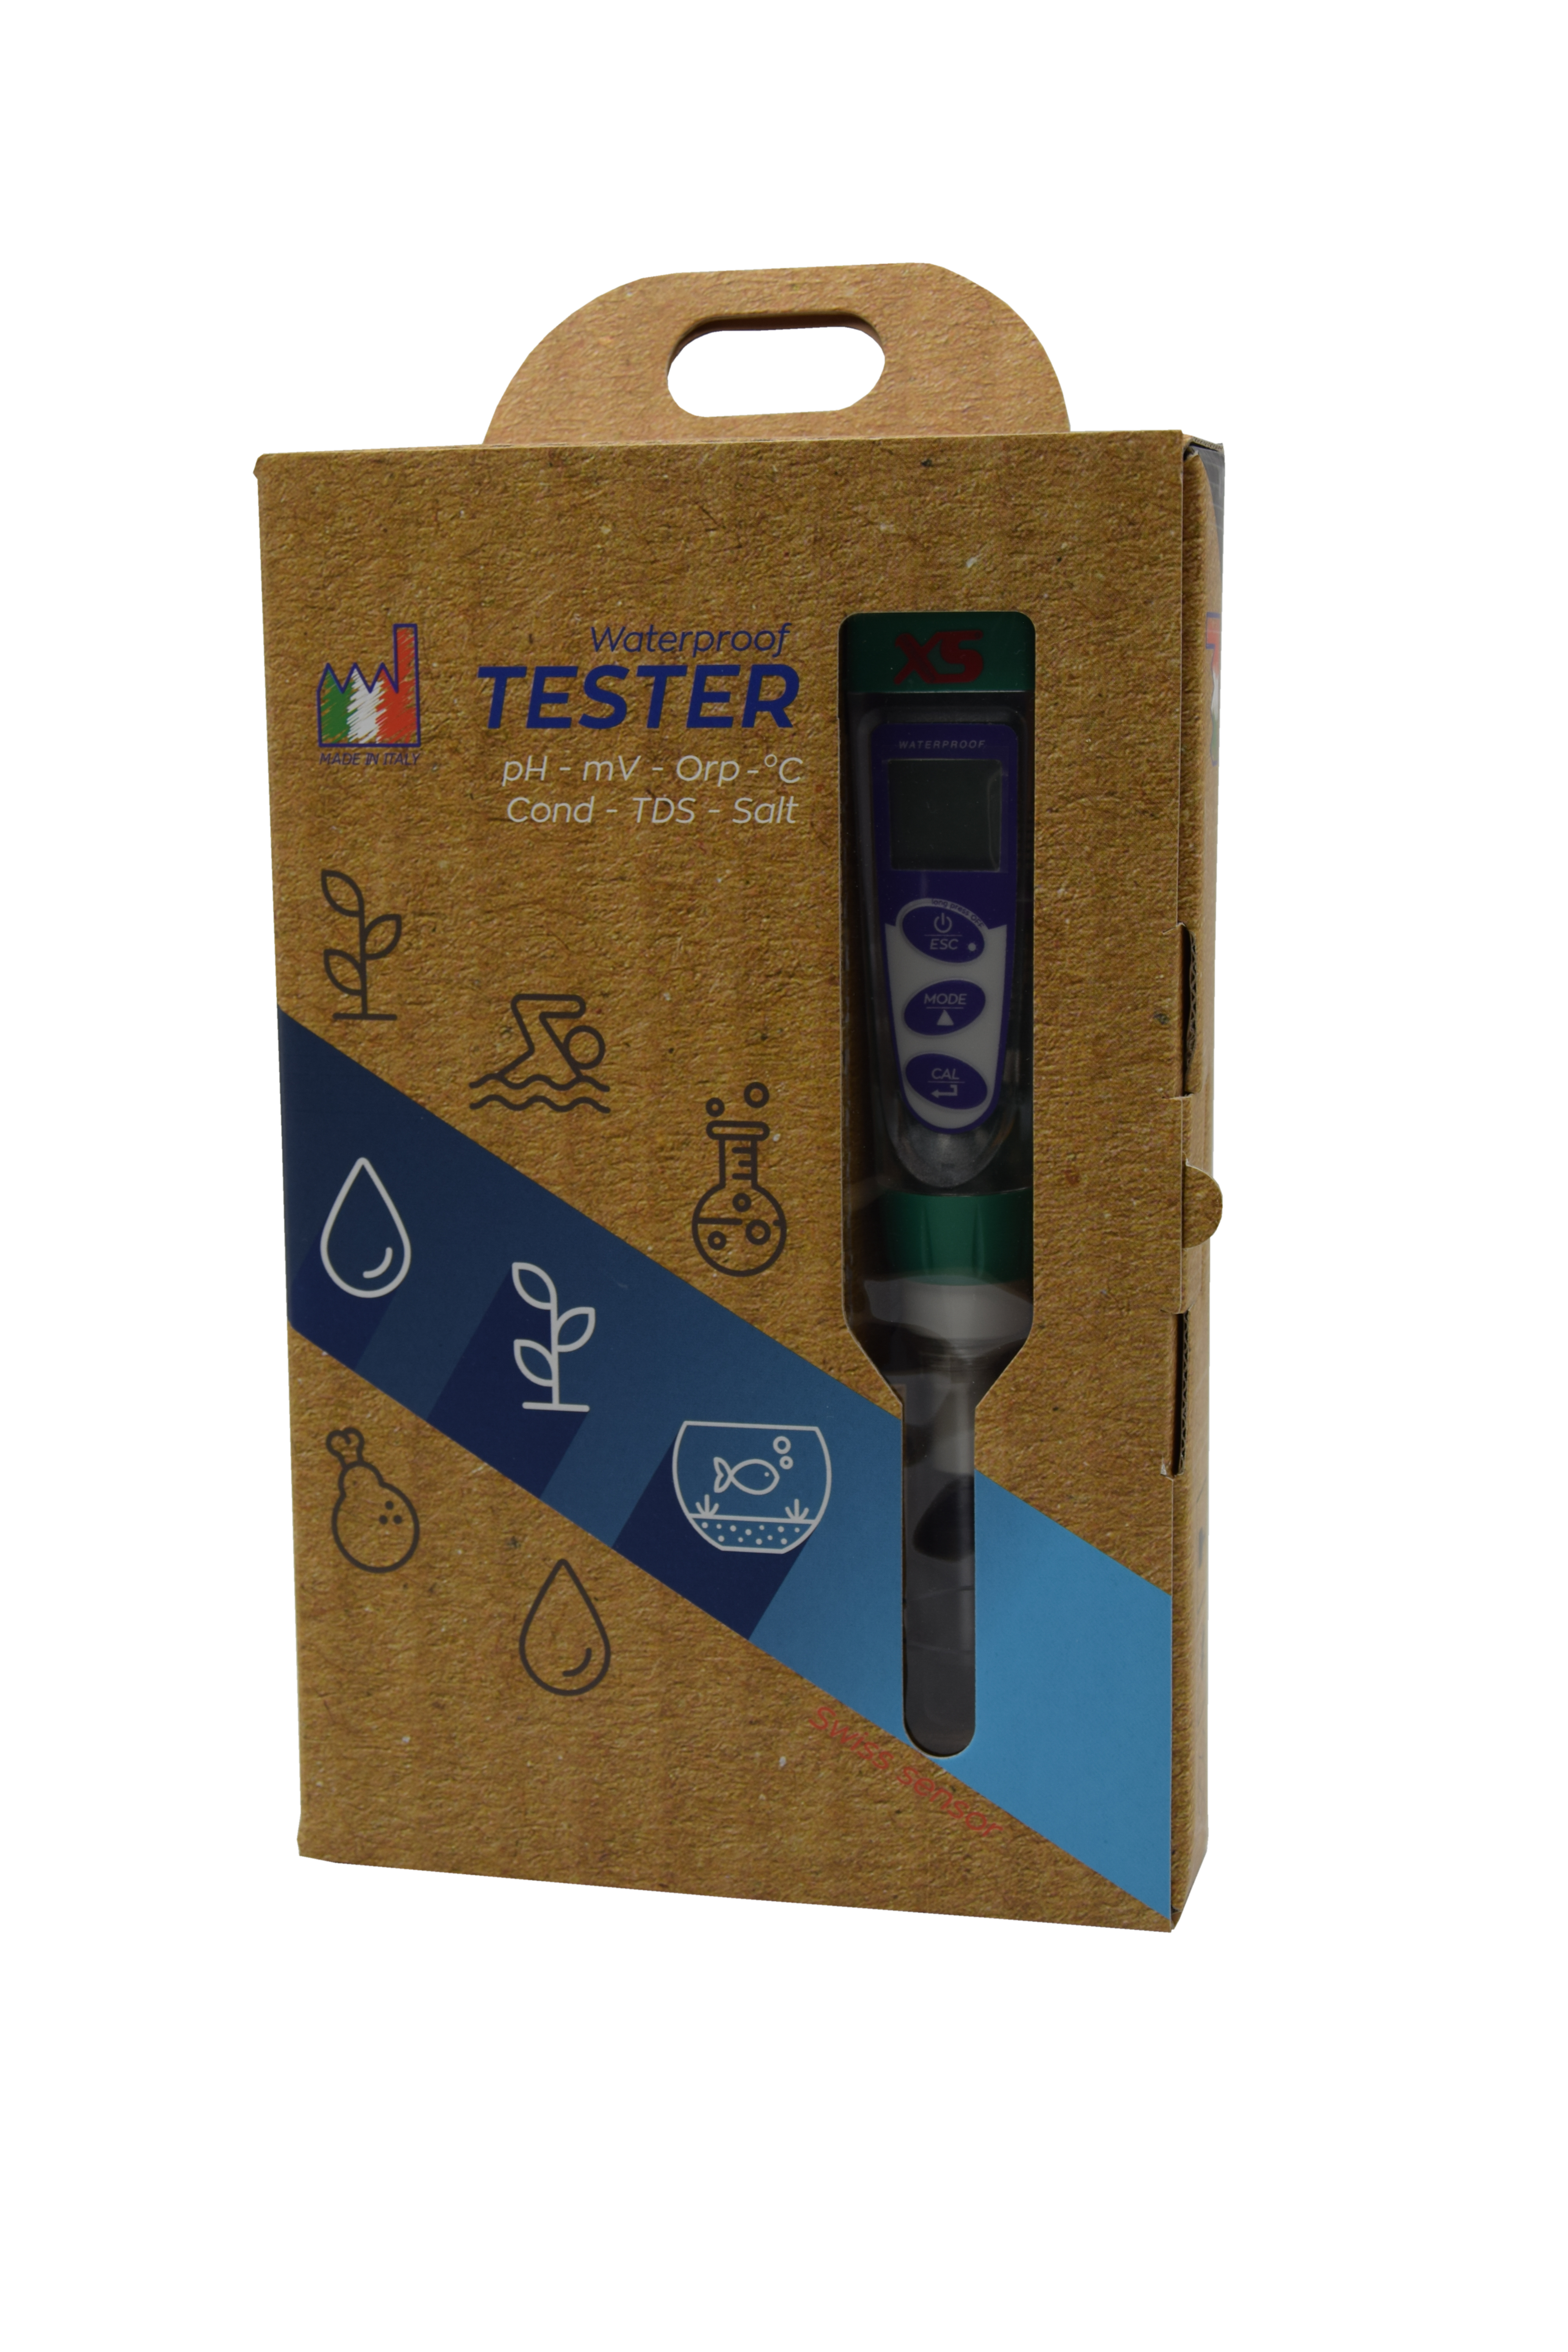 XS pH 5 Tester Kit - hand-held meter for determining the pH value and temperature